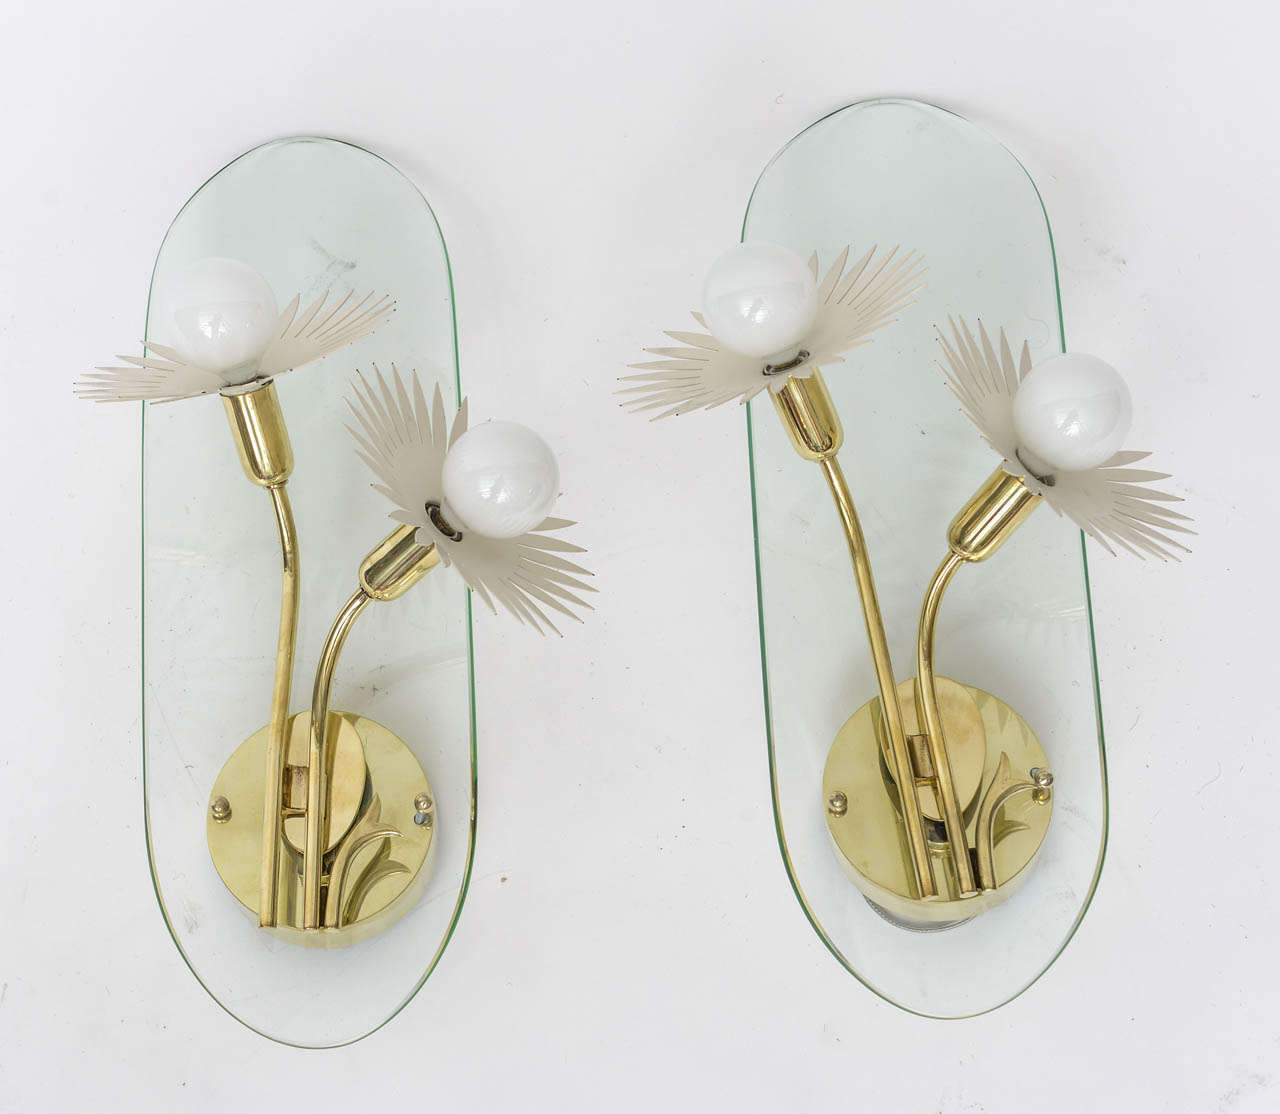 1950s Italian brass and glass wall sconces in the manner of Pietro Chiesa for Fontana Arte, with whimsical white enameled flower sockets. Professionally polished and re-wired.